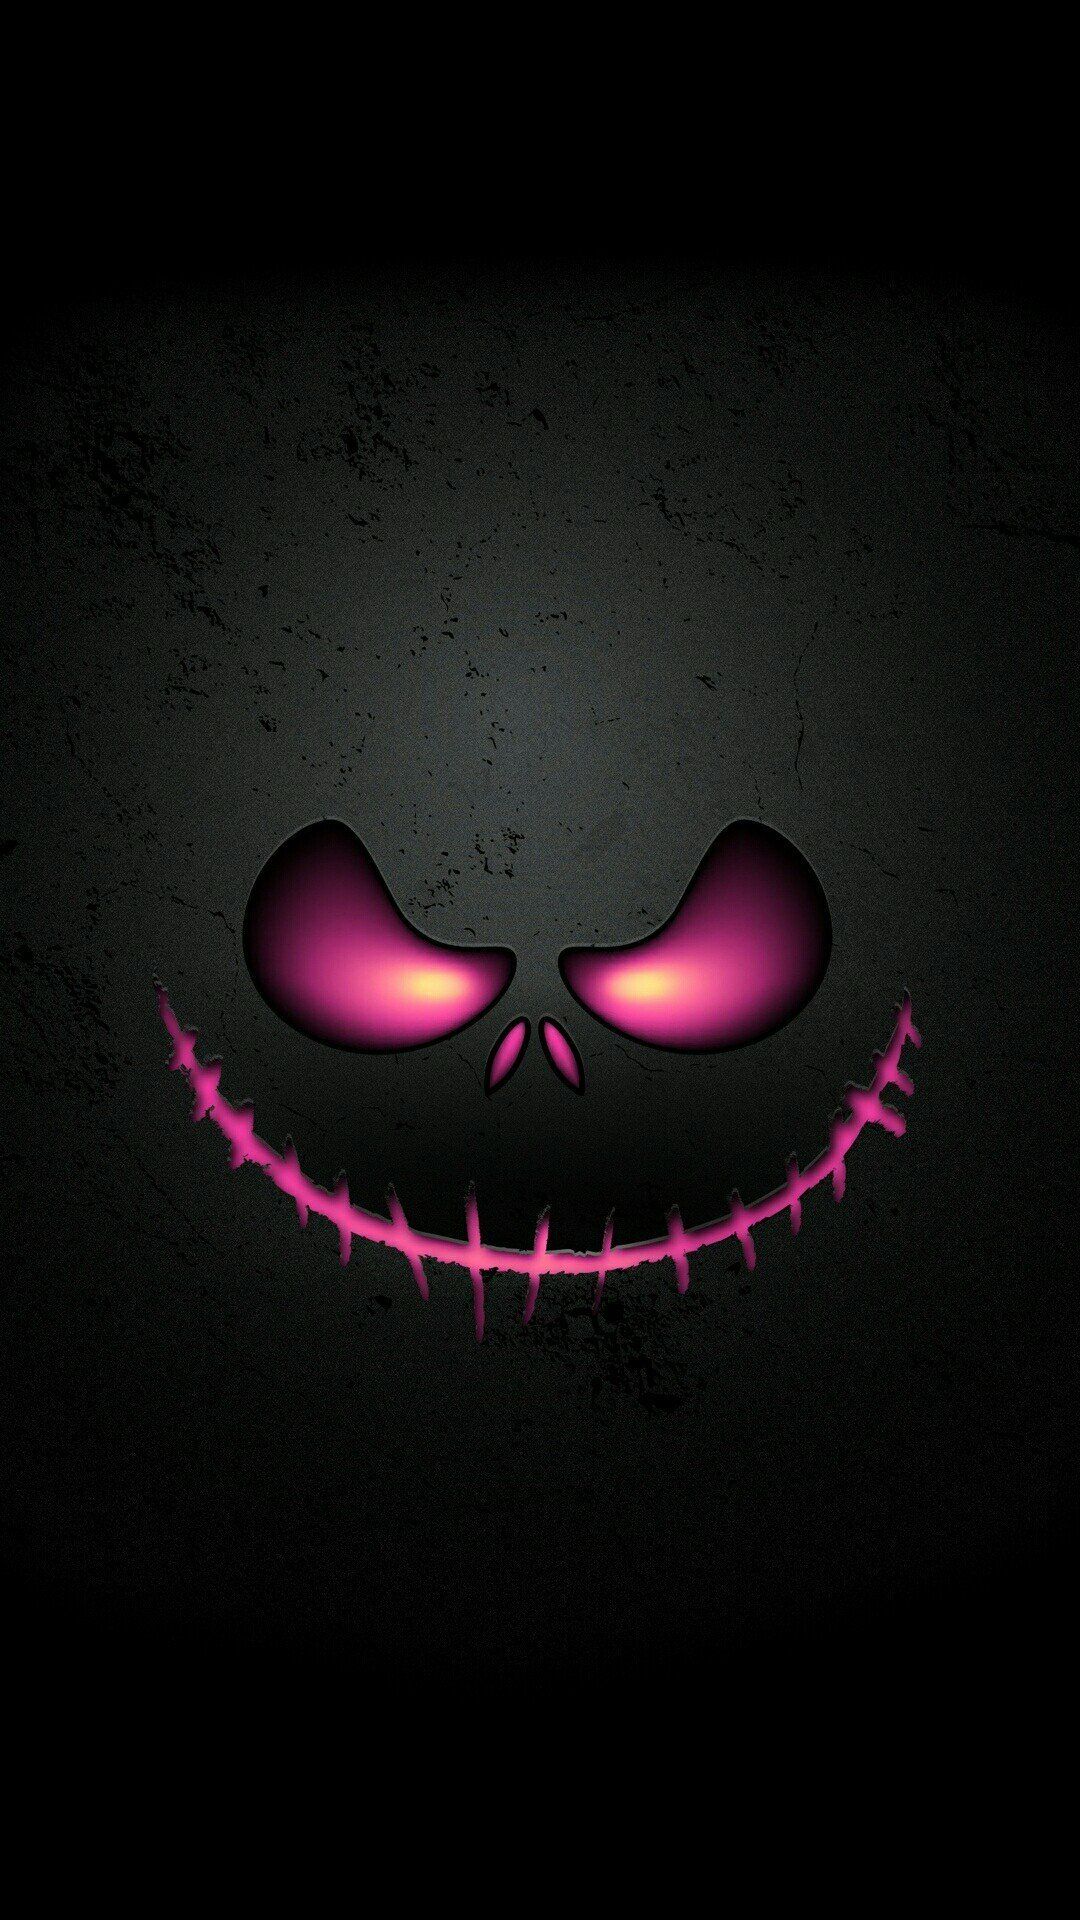 Best Halloween wallpaper for iPhone and iPad in 2020